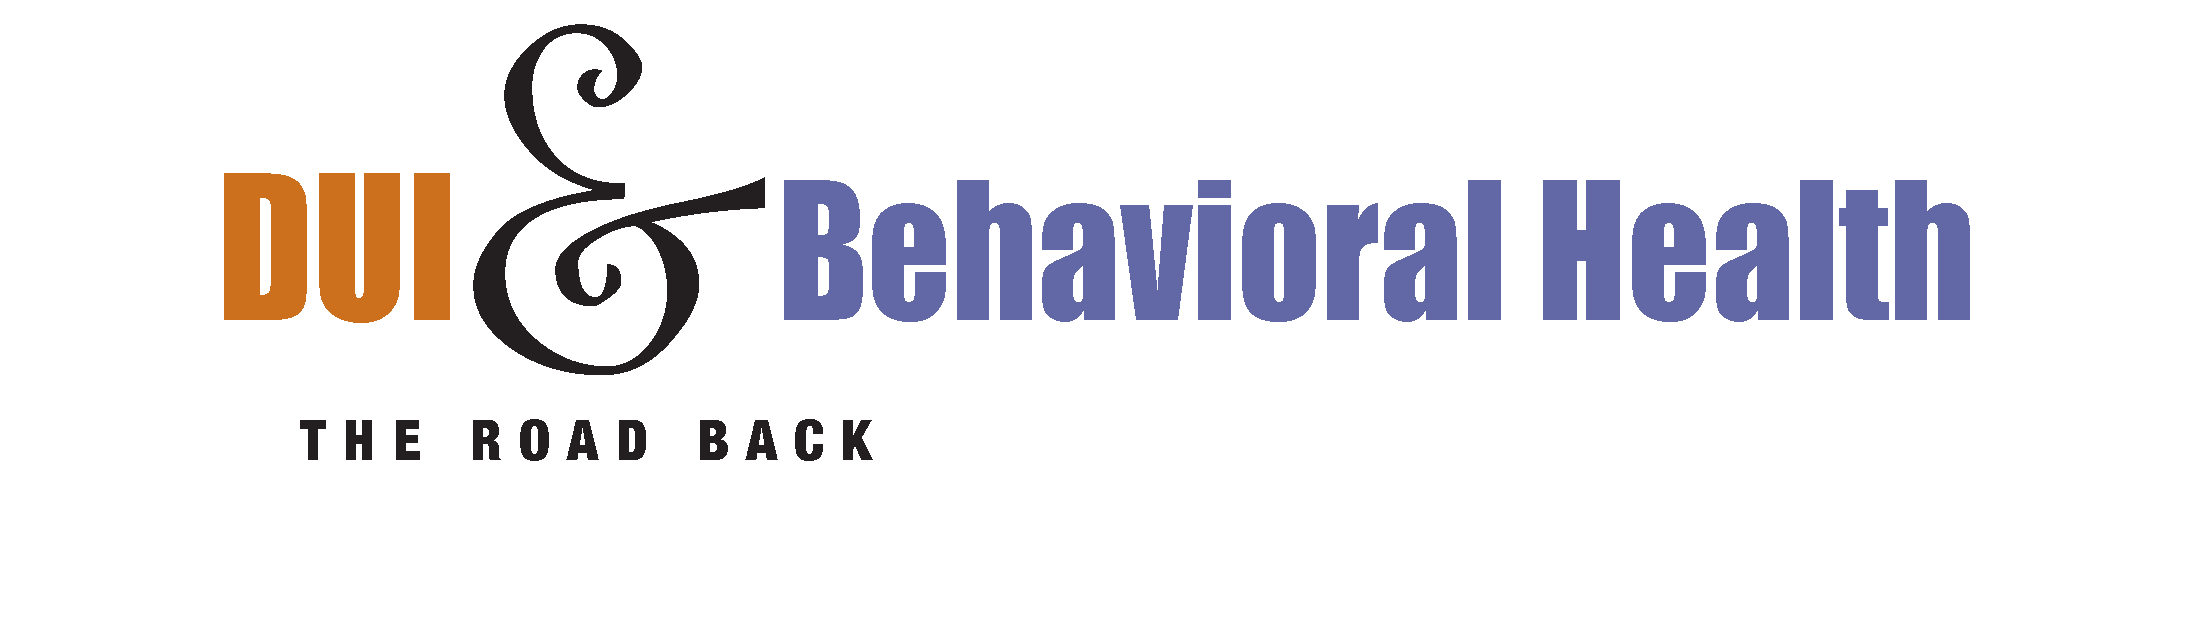 DUI, behavioral health, anger management services, substance abuse counseling in DeKalb & Kendall Counties - DUI Counseling has offices in Sycamore, Plano, and Crystal Lake providing behavioral health counseling services, substance abuse counseling, drug and alcohol evaluation, and certified substance abuse counselors.